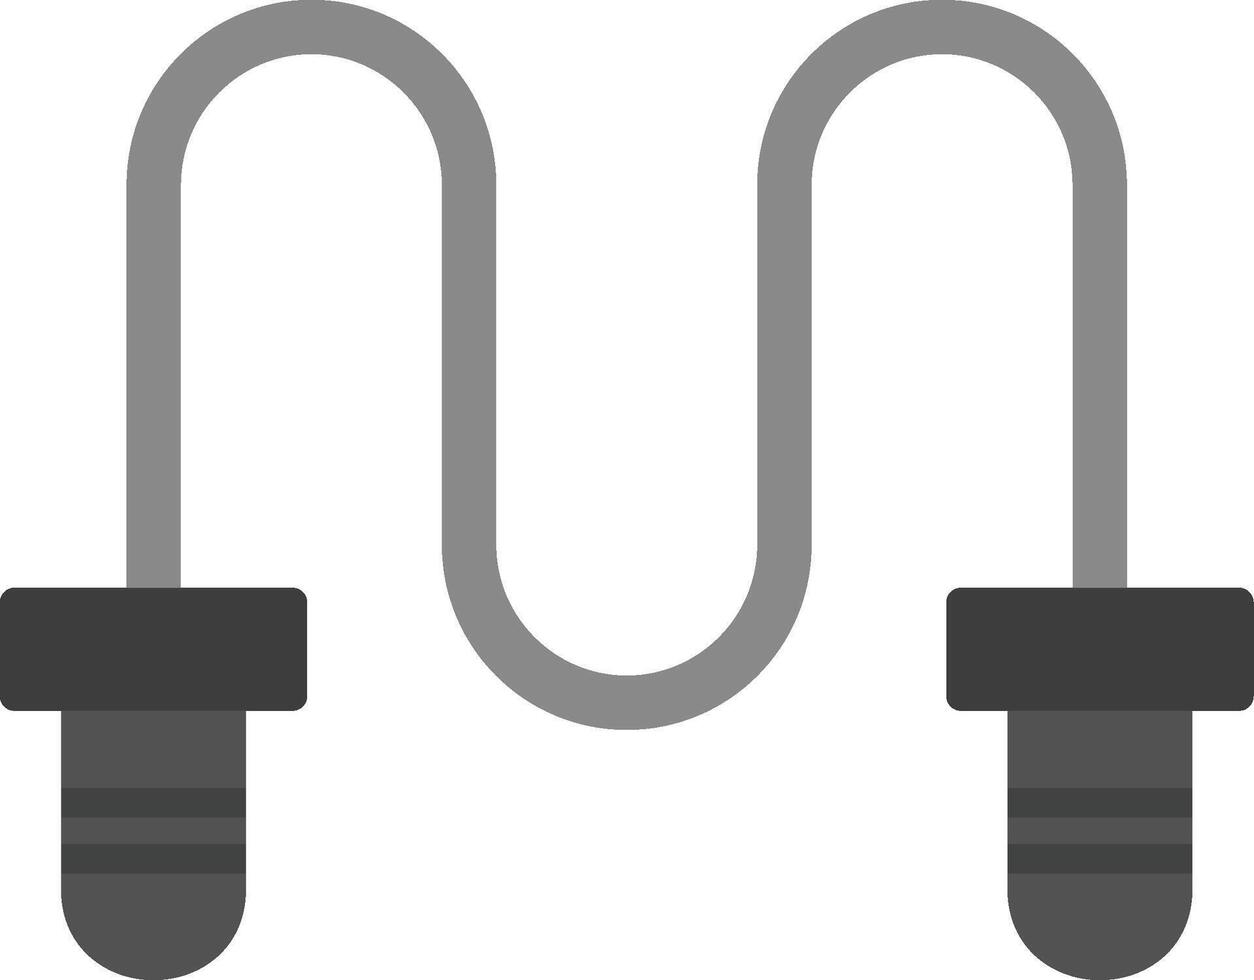 Jumping rope Vector Icon